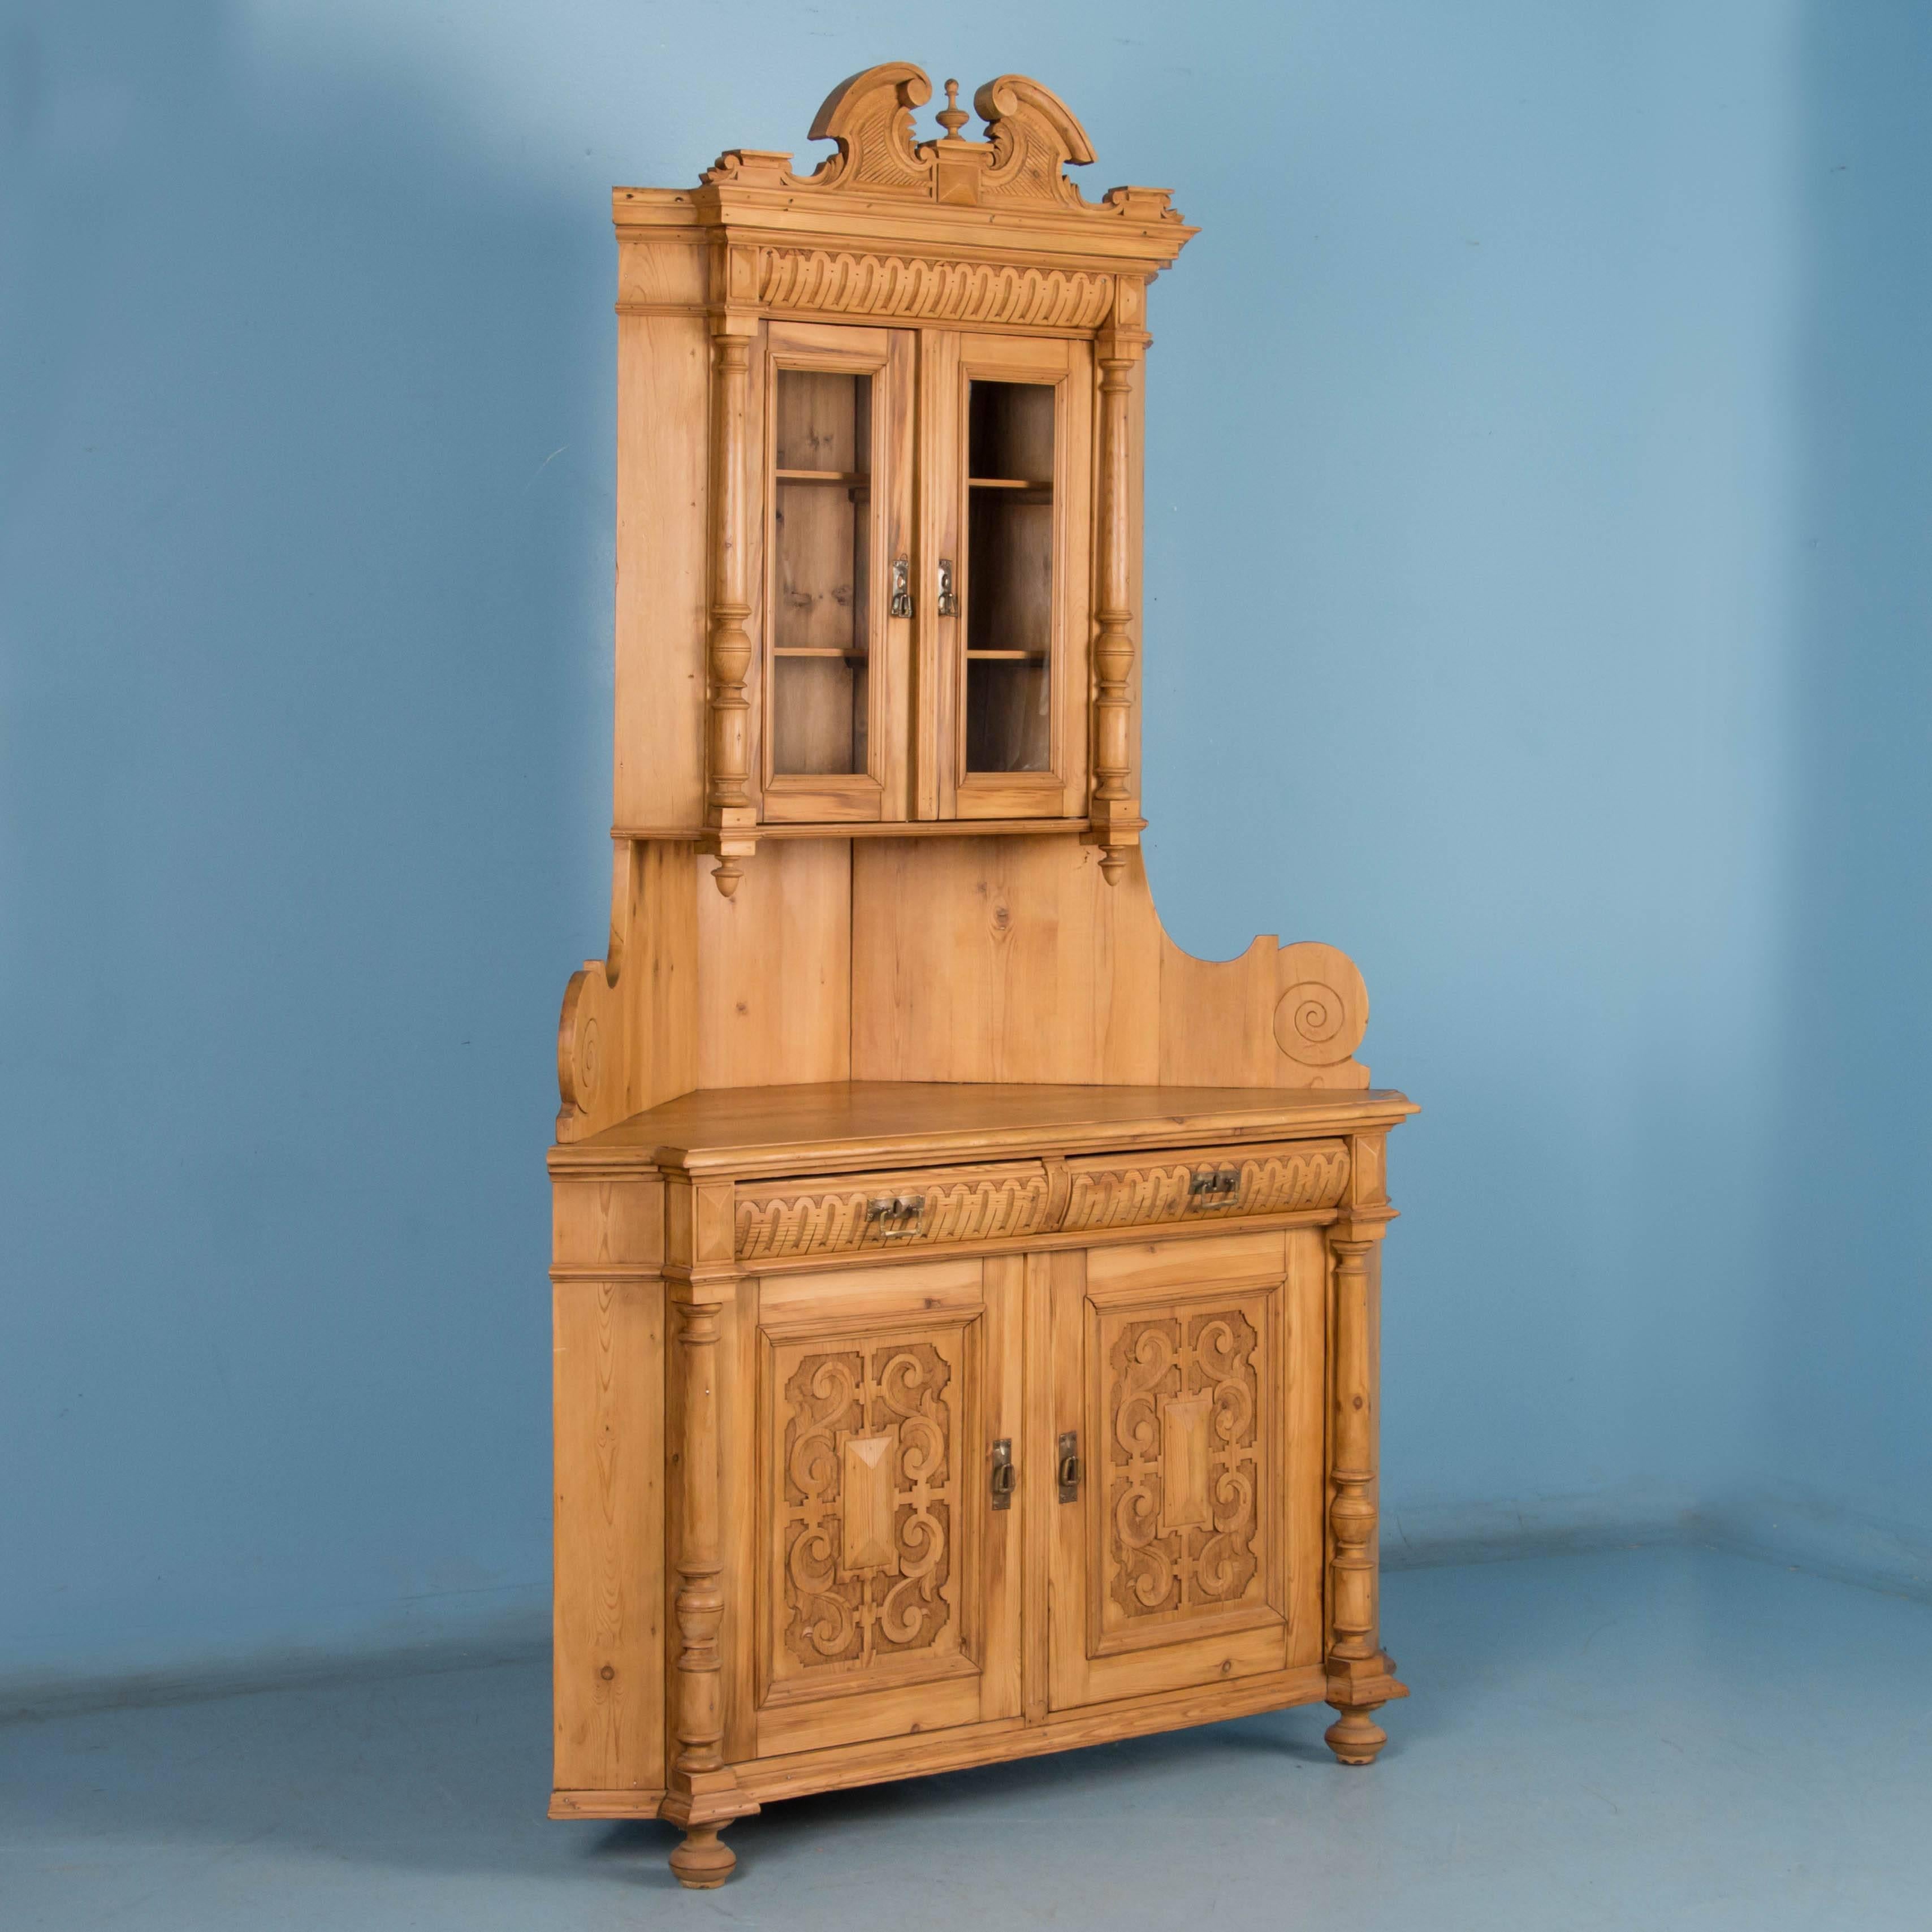 The ornate carving on the panel doors makes a strong statement while the column details, finials, and crown add an ornate touch to this original pine corner cabinet. Please examine the photos to appreciate how all these features blend together for a